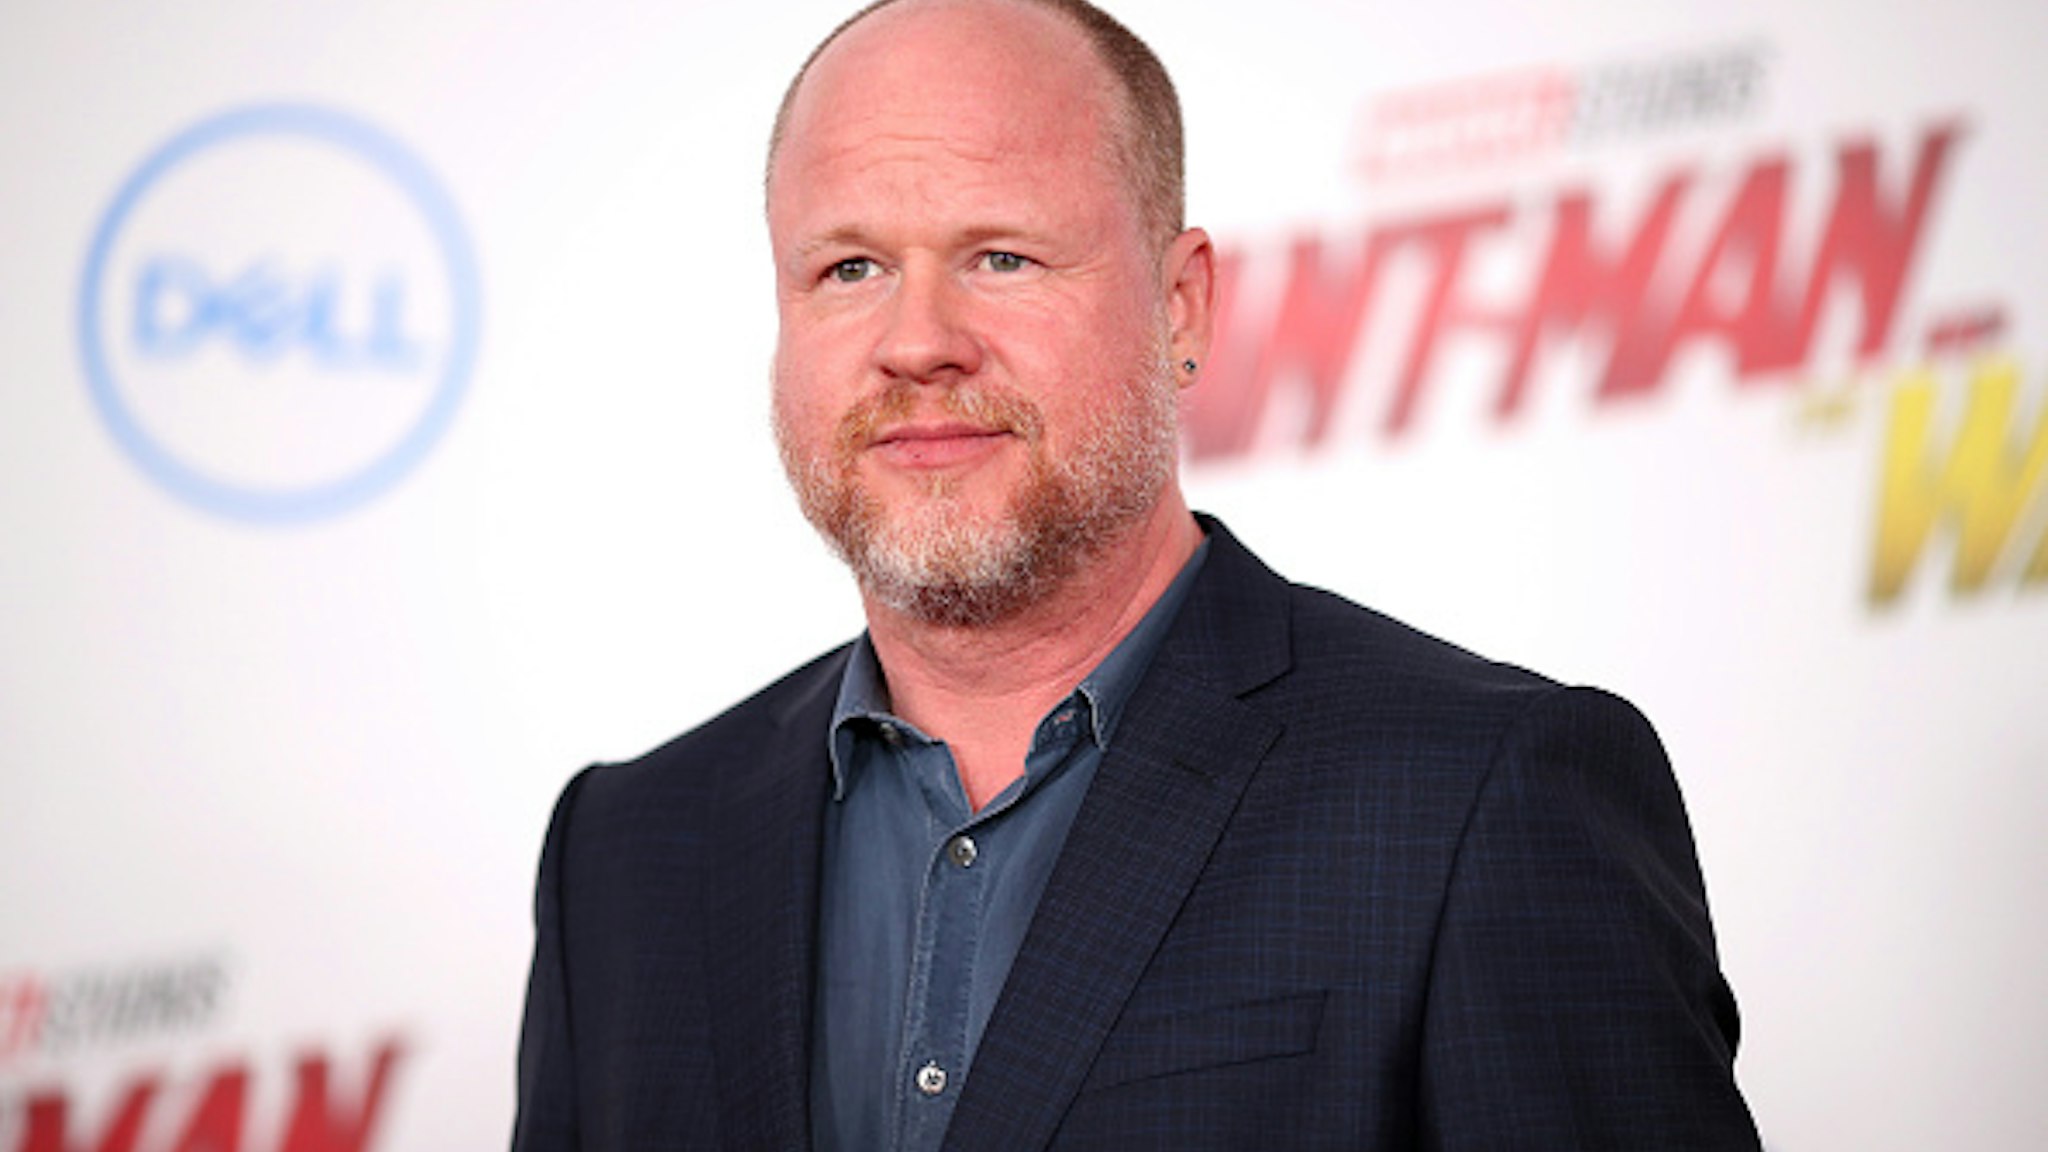 LOS ANGELES, CA - JUNE 25: Joss Whedon attends the premiere of Disney And Marvel's "Ant-Man And The Wasp" on June 25, 2018 in Los Angeles, California.